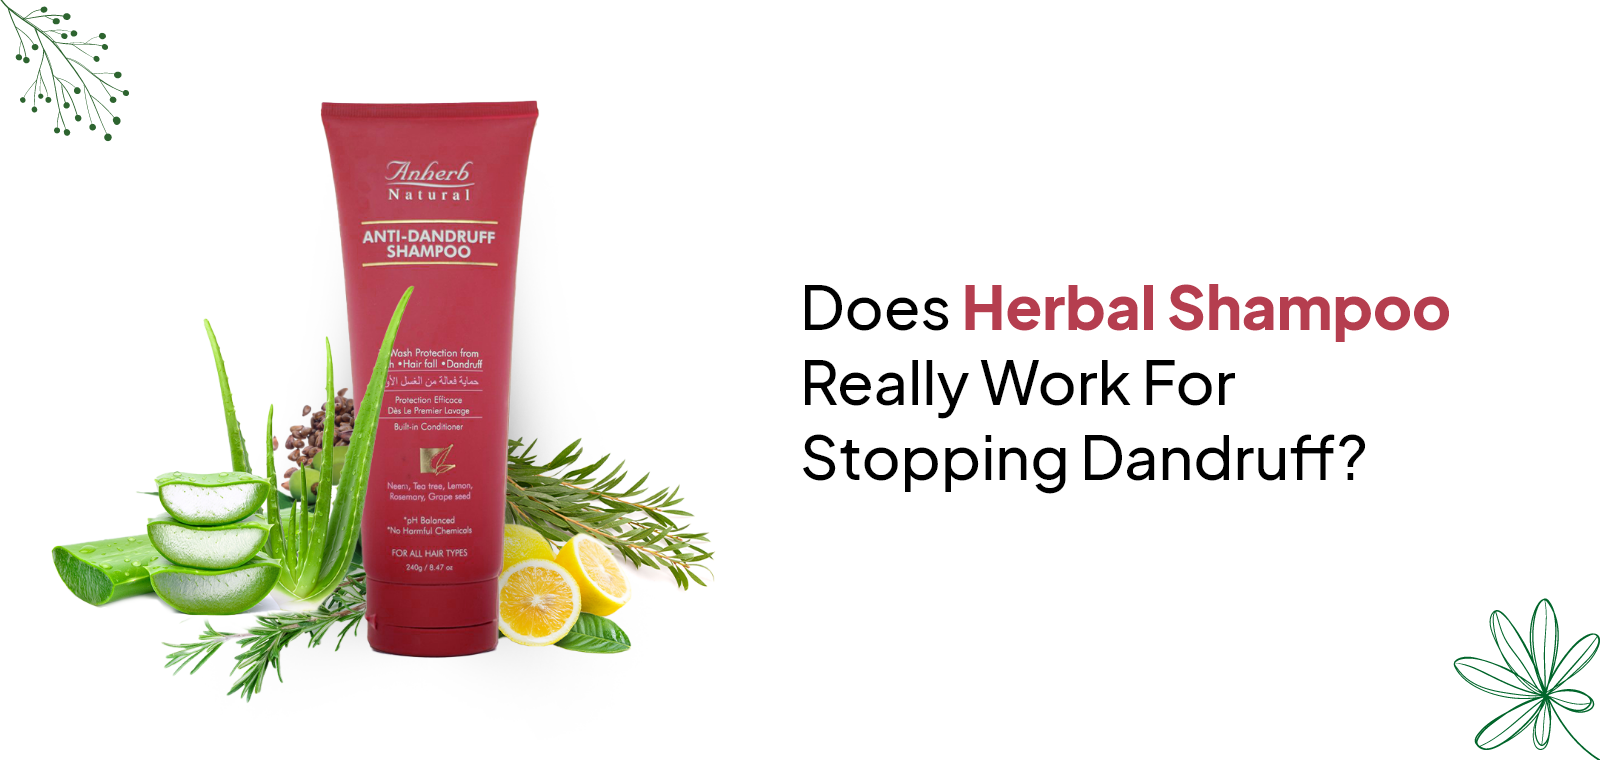 Does Herbal Shampoo Really Work For Stopping Dandruff?